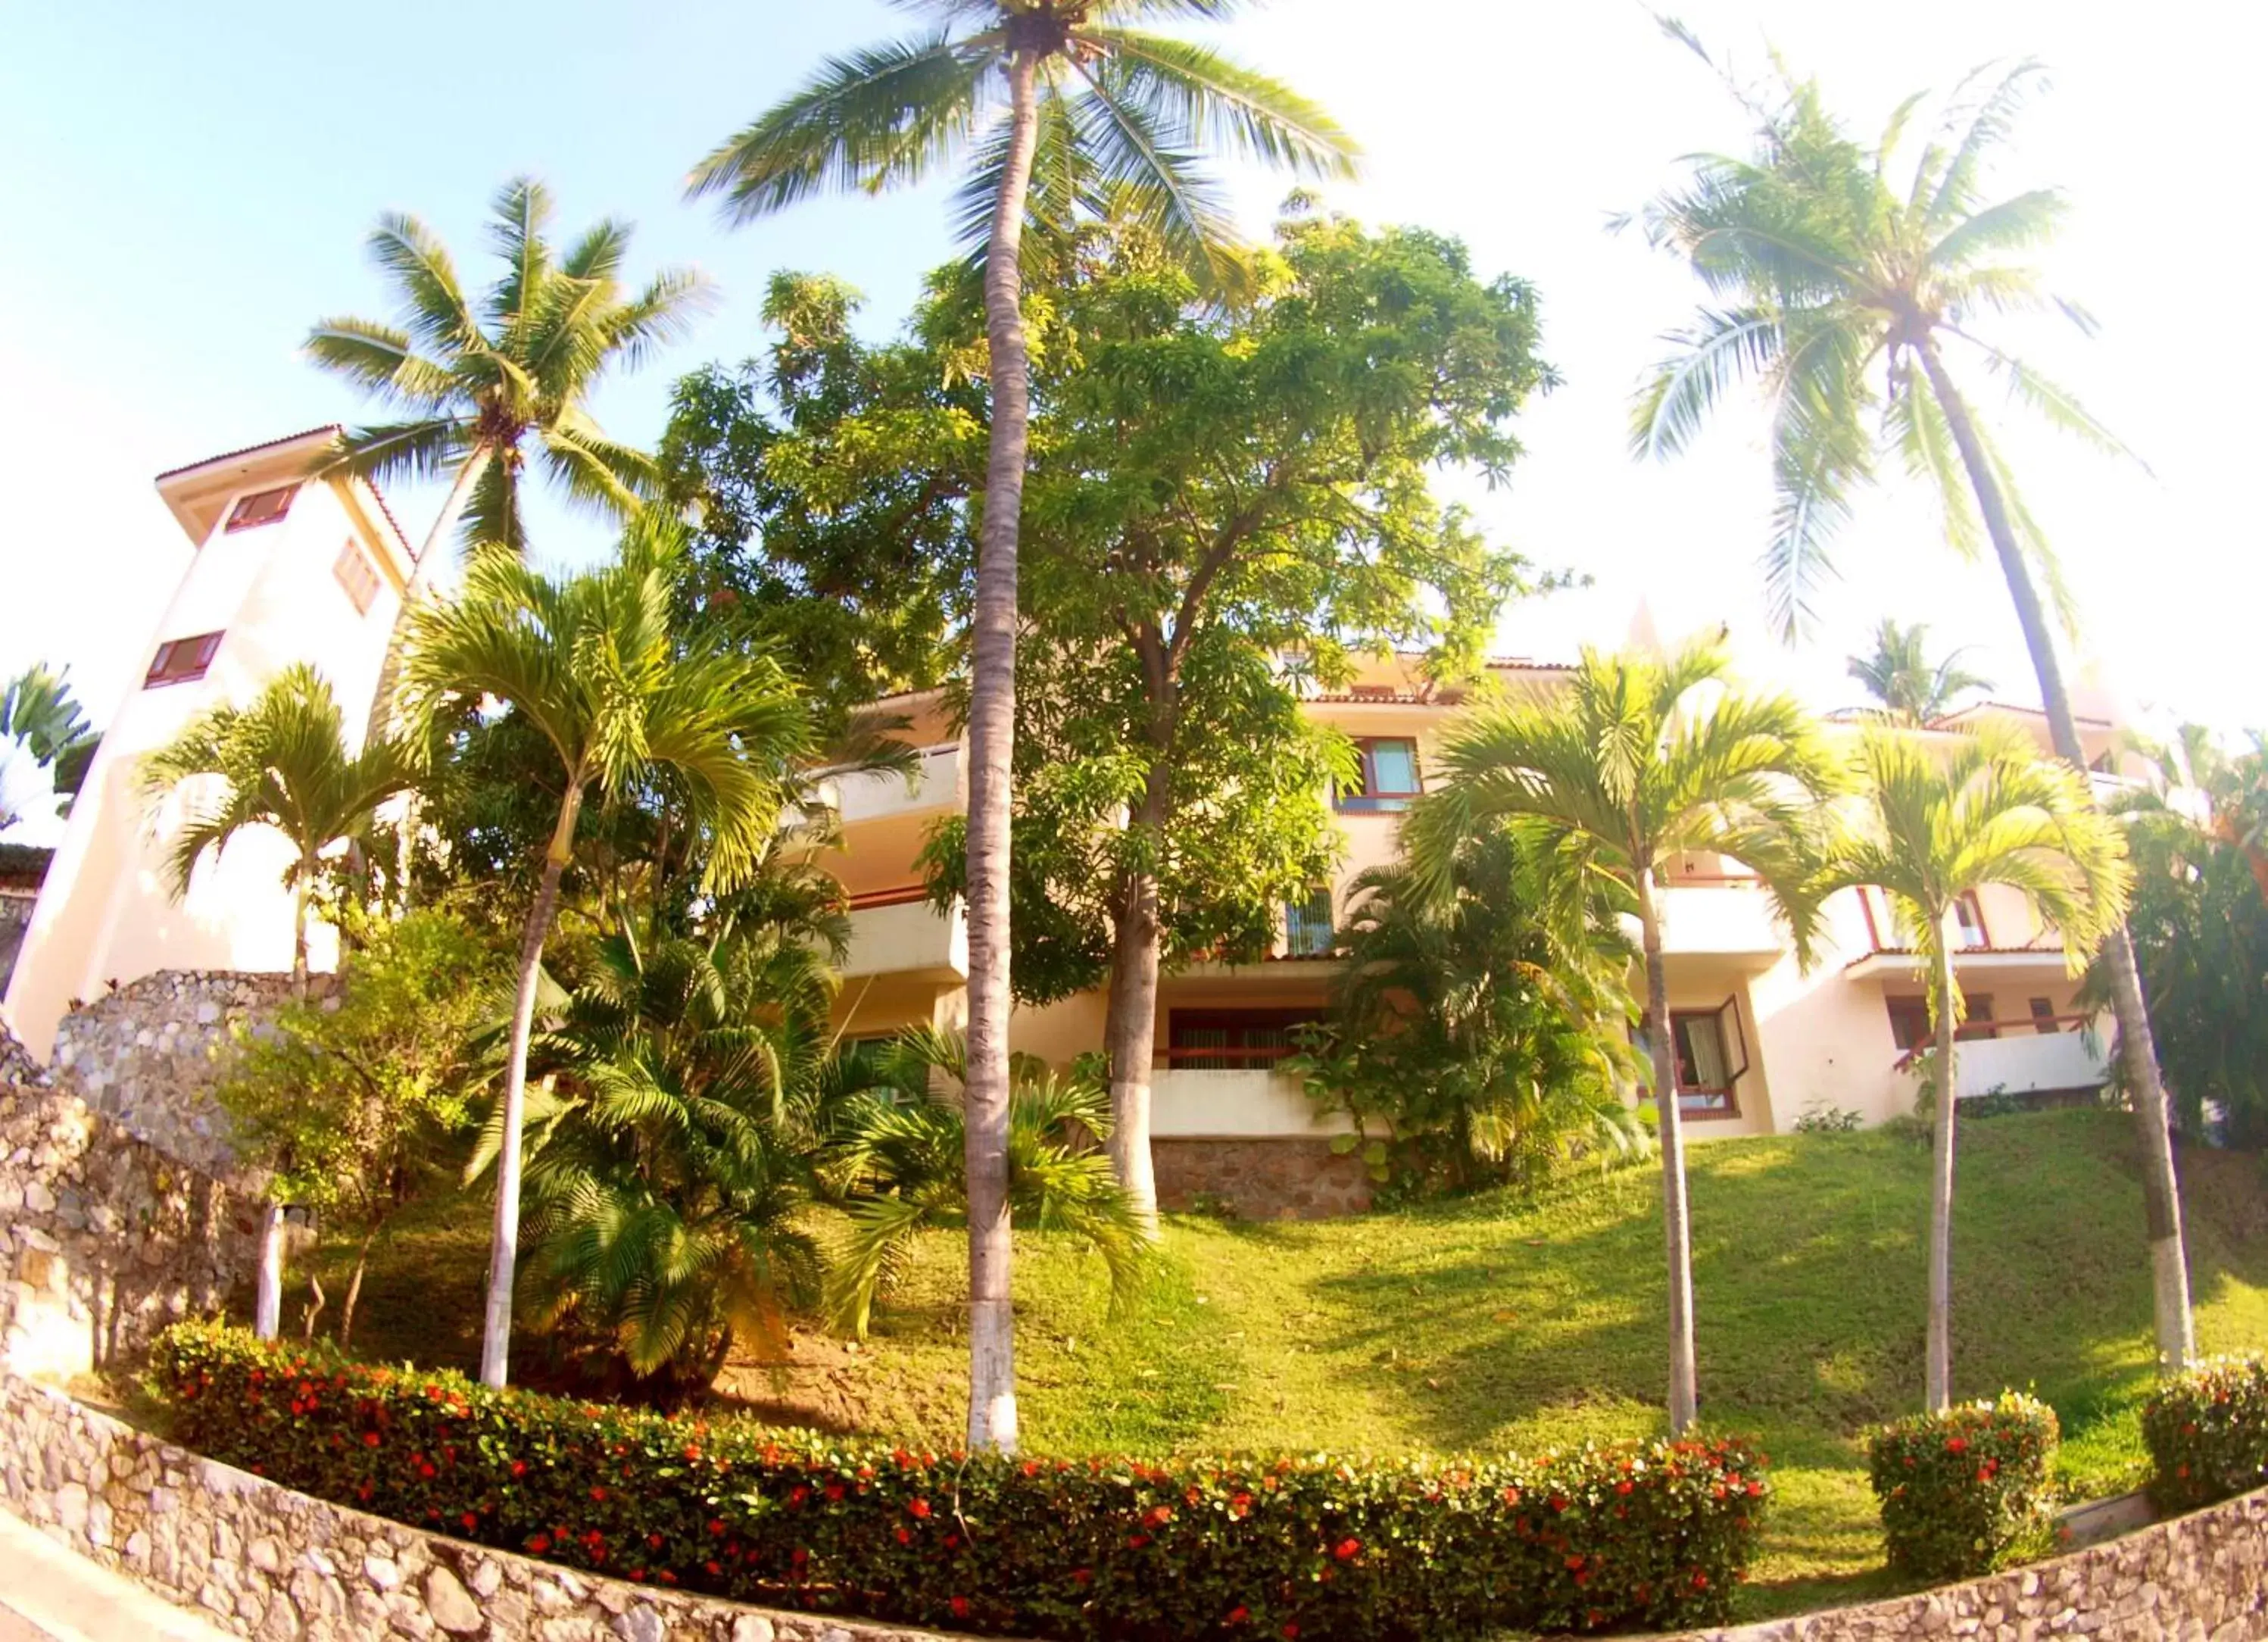 View (from property/room), Property Building in Villas del Palmar Manzanillo with Beach Club